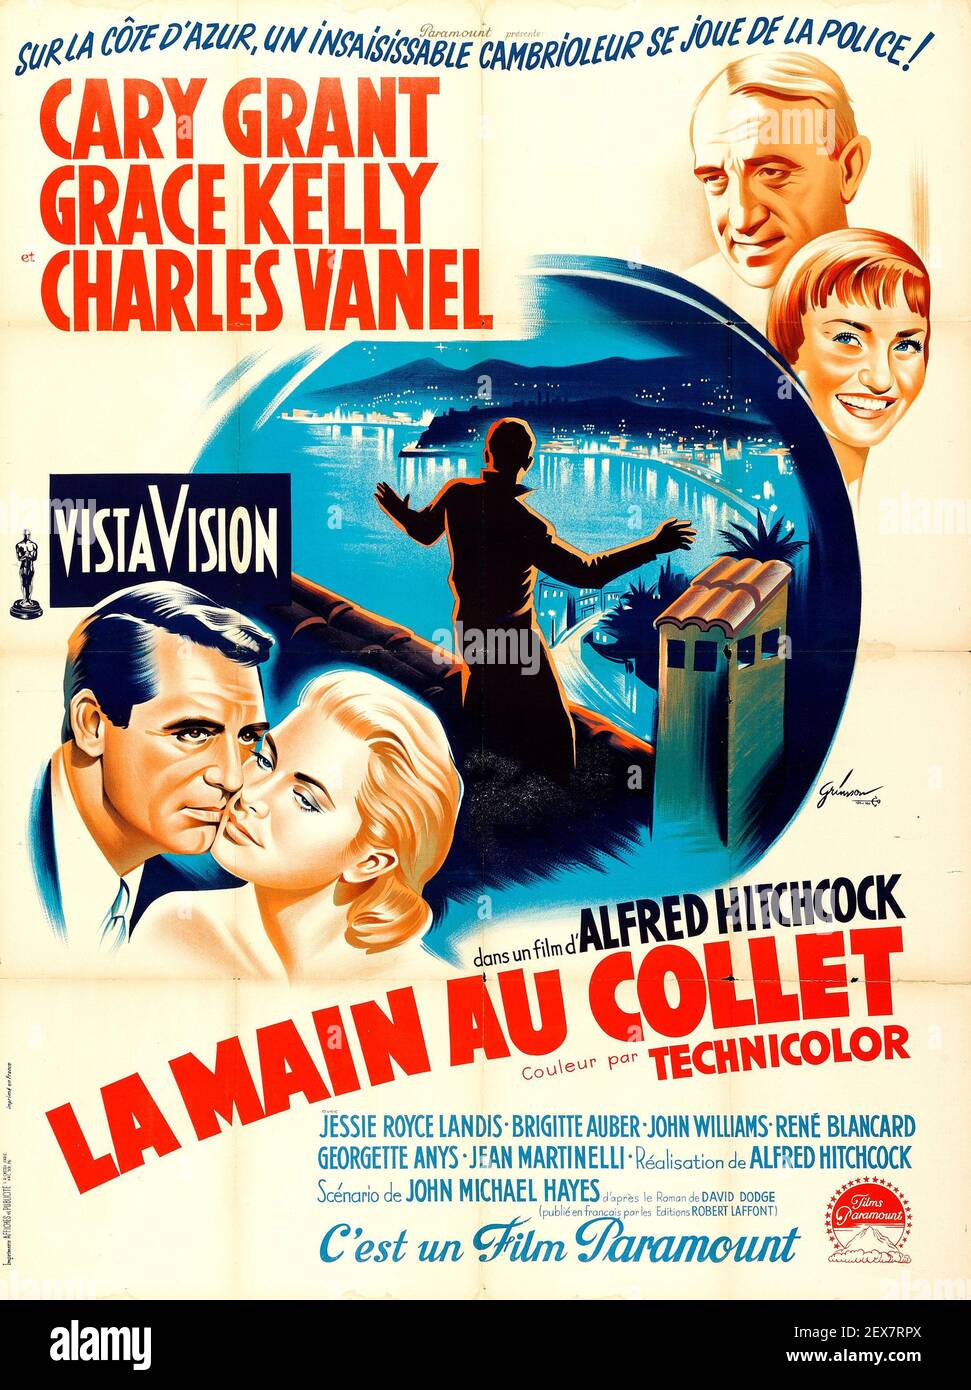 Cary Grant, Grace Kelly in Alfred Hitchcock movie poster for To Catch A  Thief. French version Stock Photo - Alamy